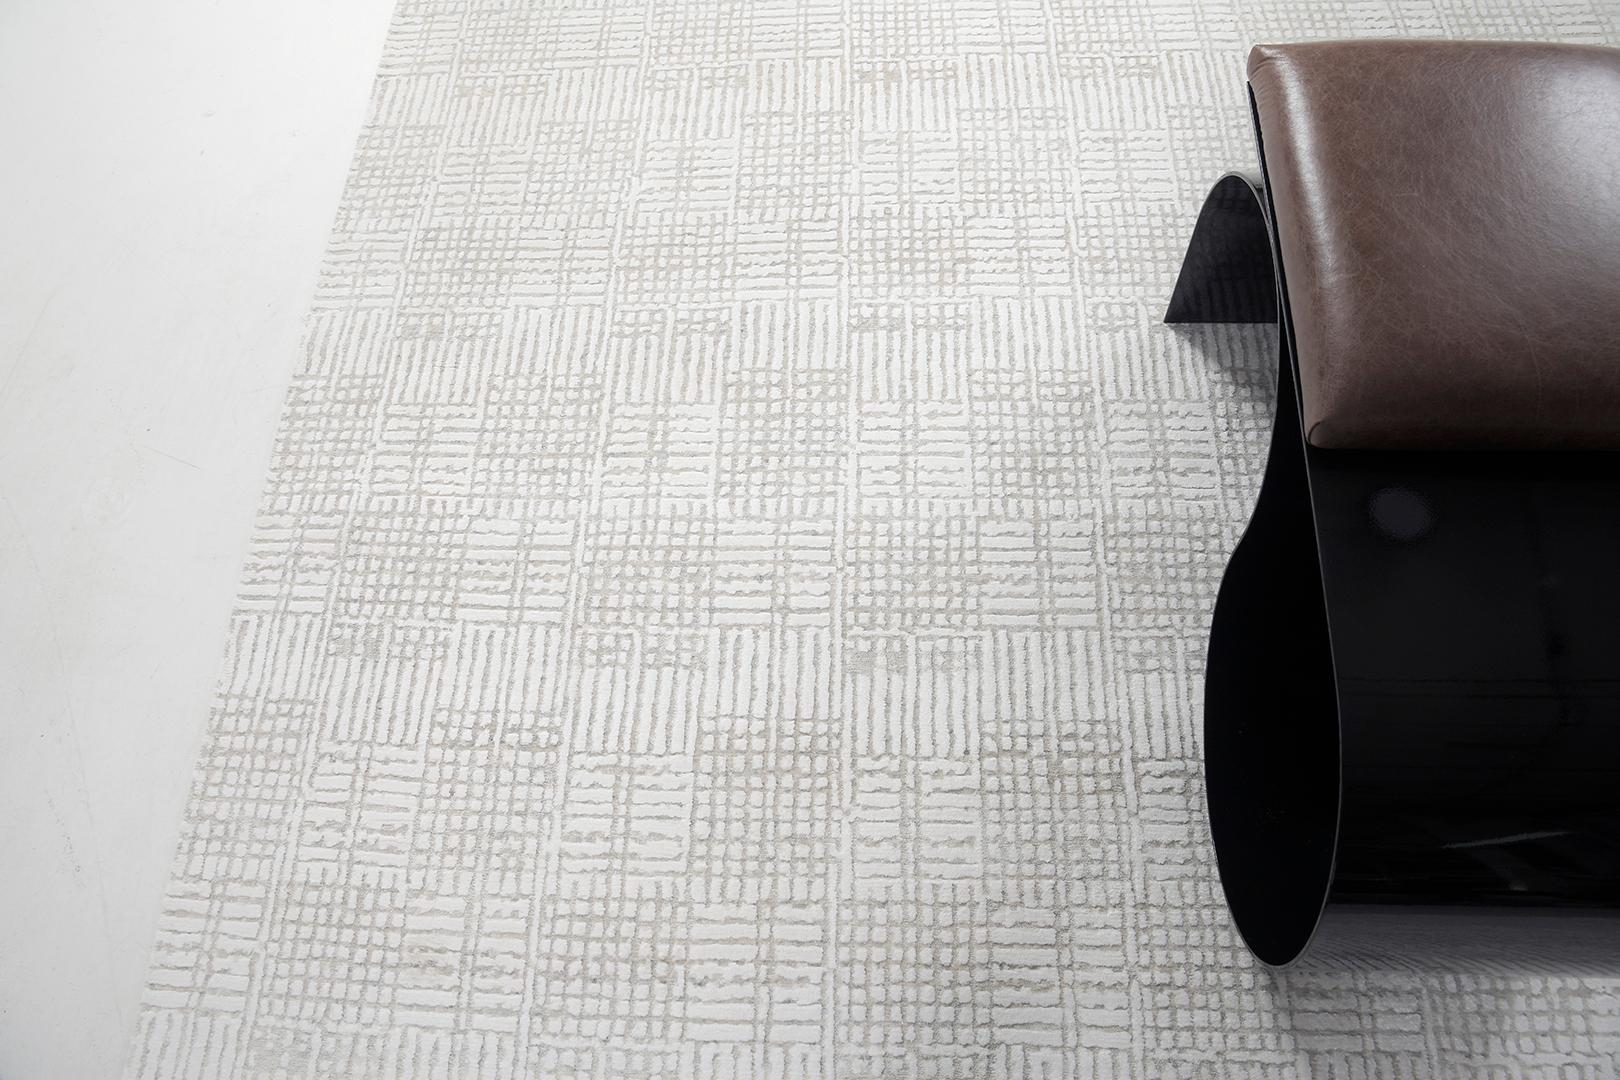 Tappa is a gorgeous bamboo silk that features an embossed patterned rug in a neutral-toned scheme. It brings your home pristine and elegant interiors. Elan collections are a must-have on your list when it comes to modern and contemporary home